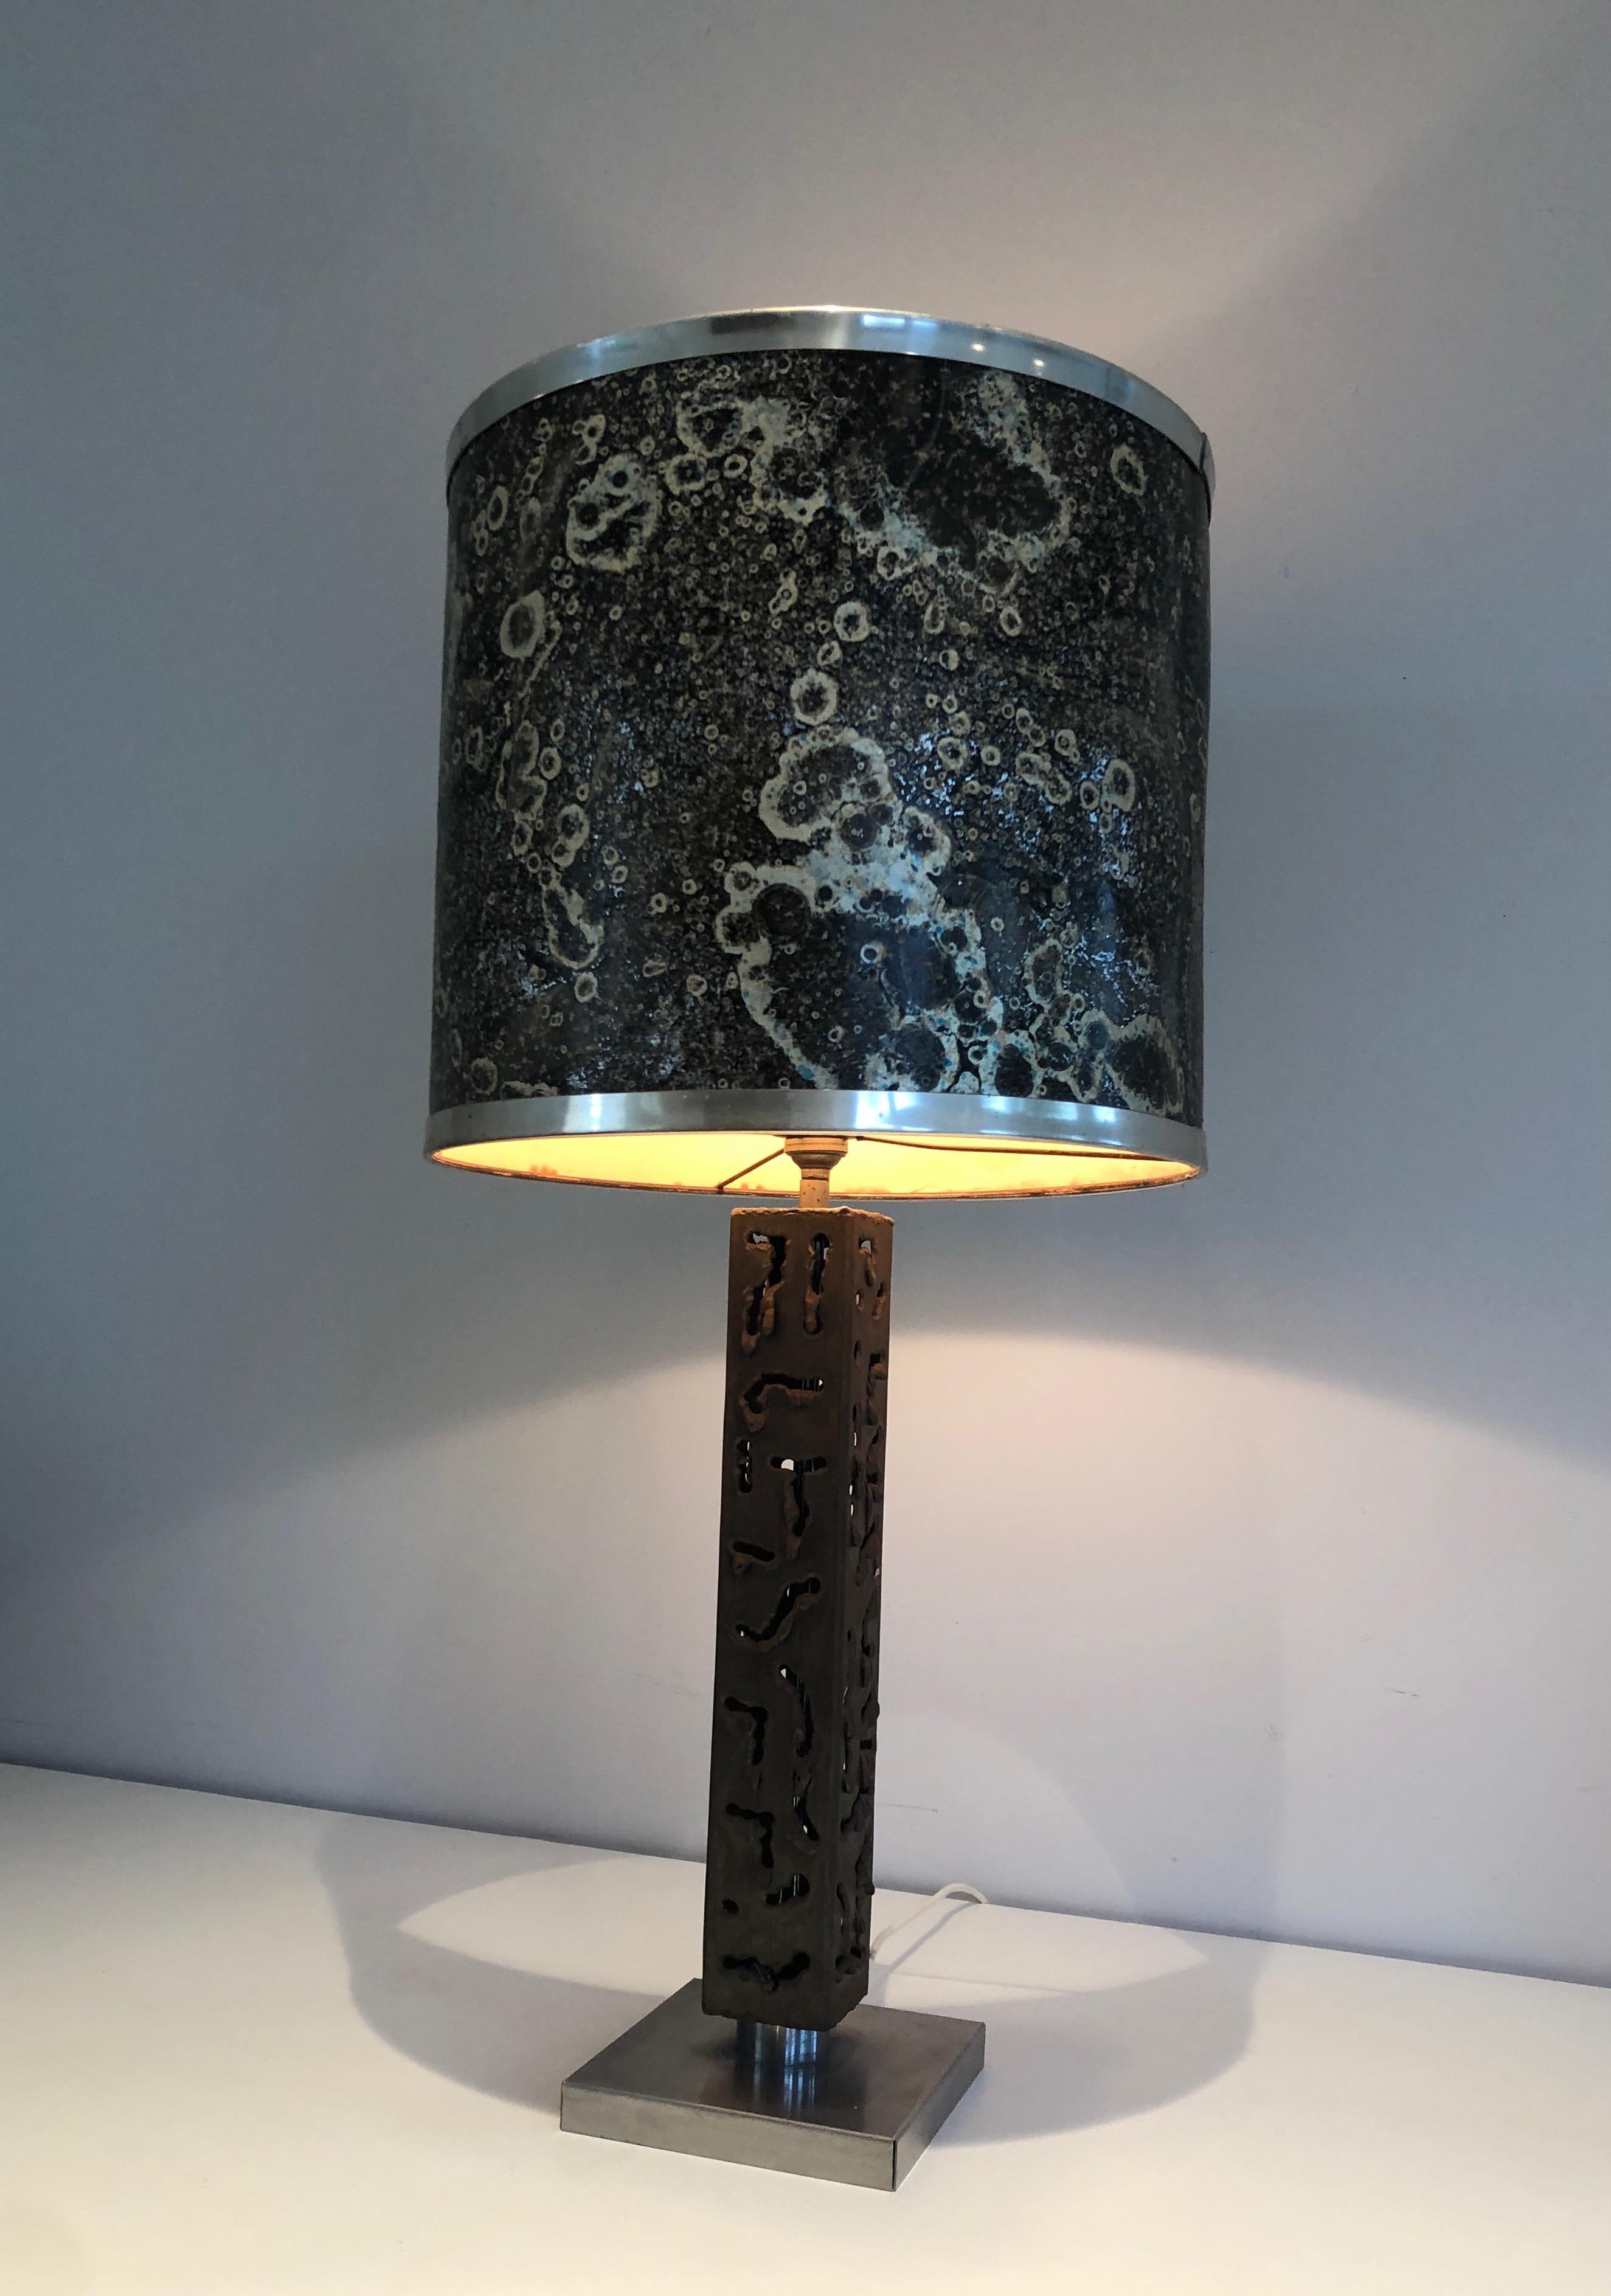 Worked Steel Design Table Lamp, French Work, circa 1970 For Sale 12